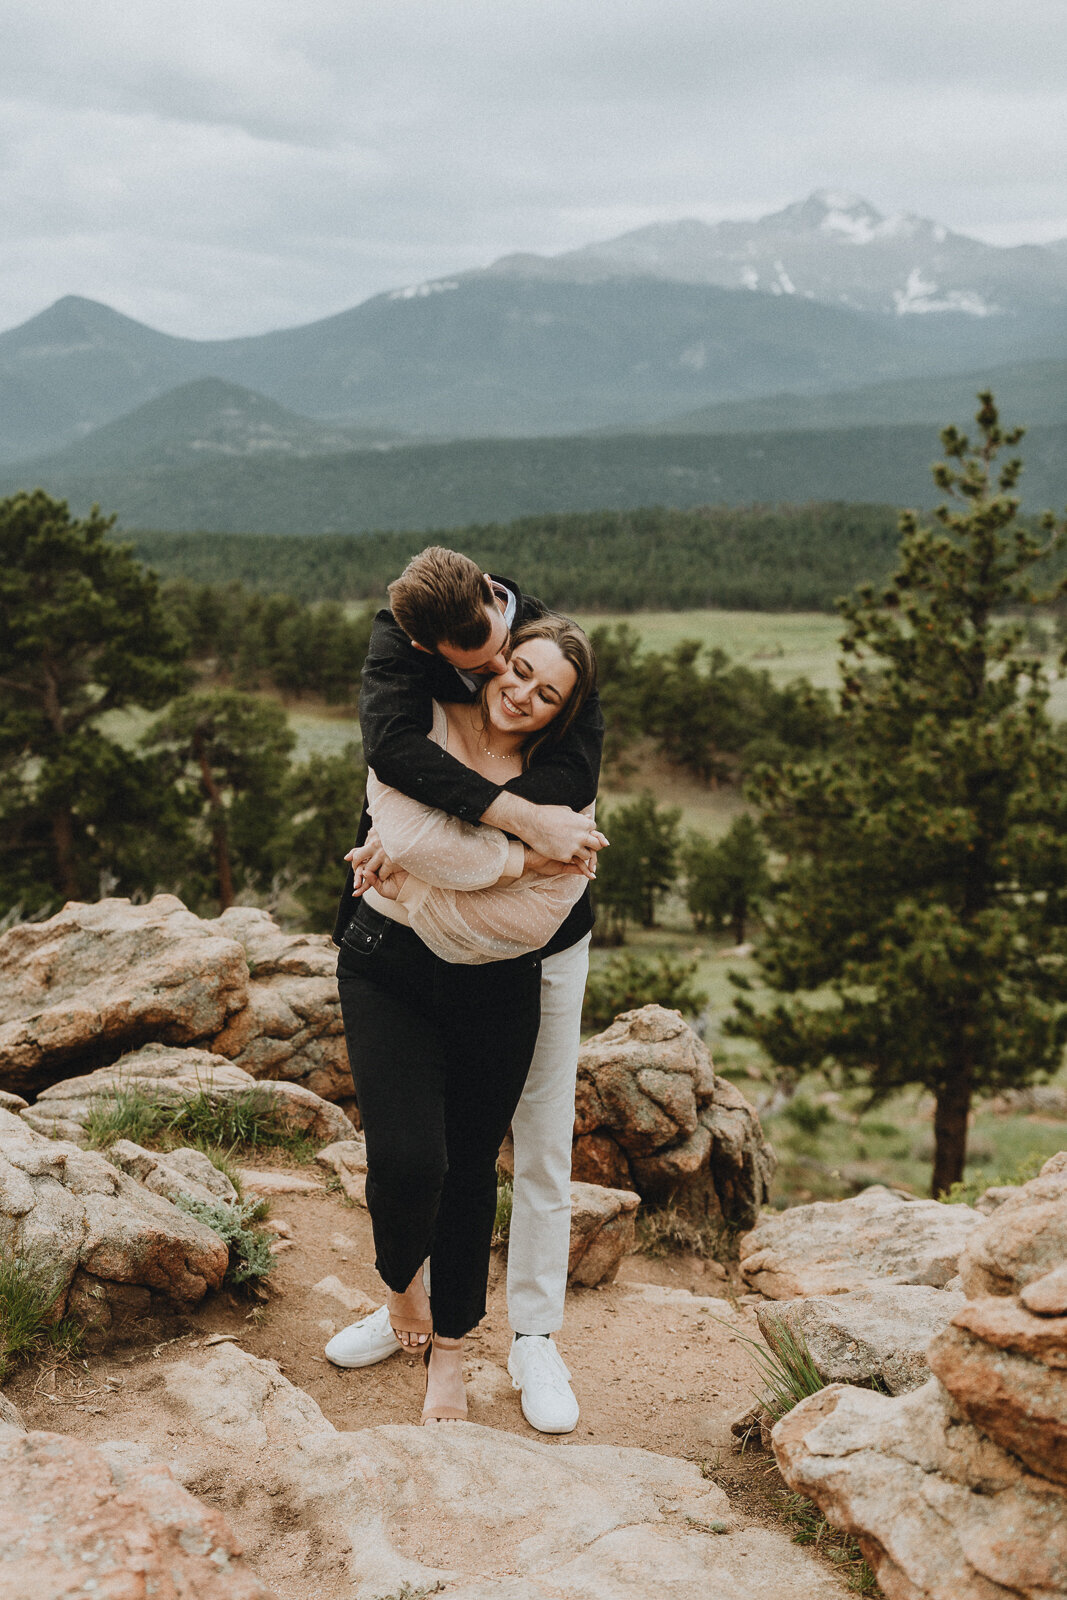 Colorado elopement photographer Jessica Margaret is ditching the traditional to document the one-of-a-kind!